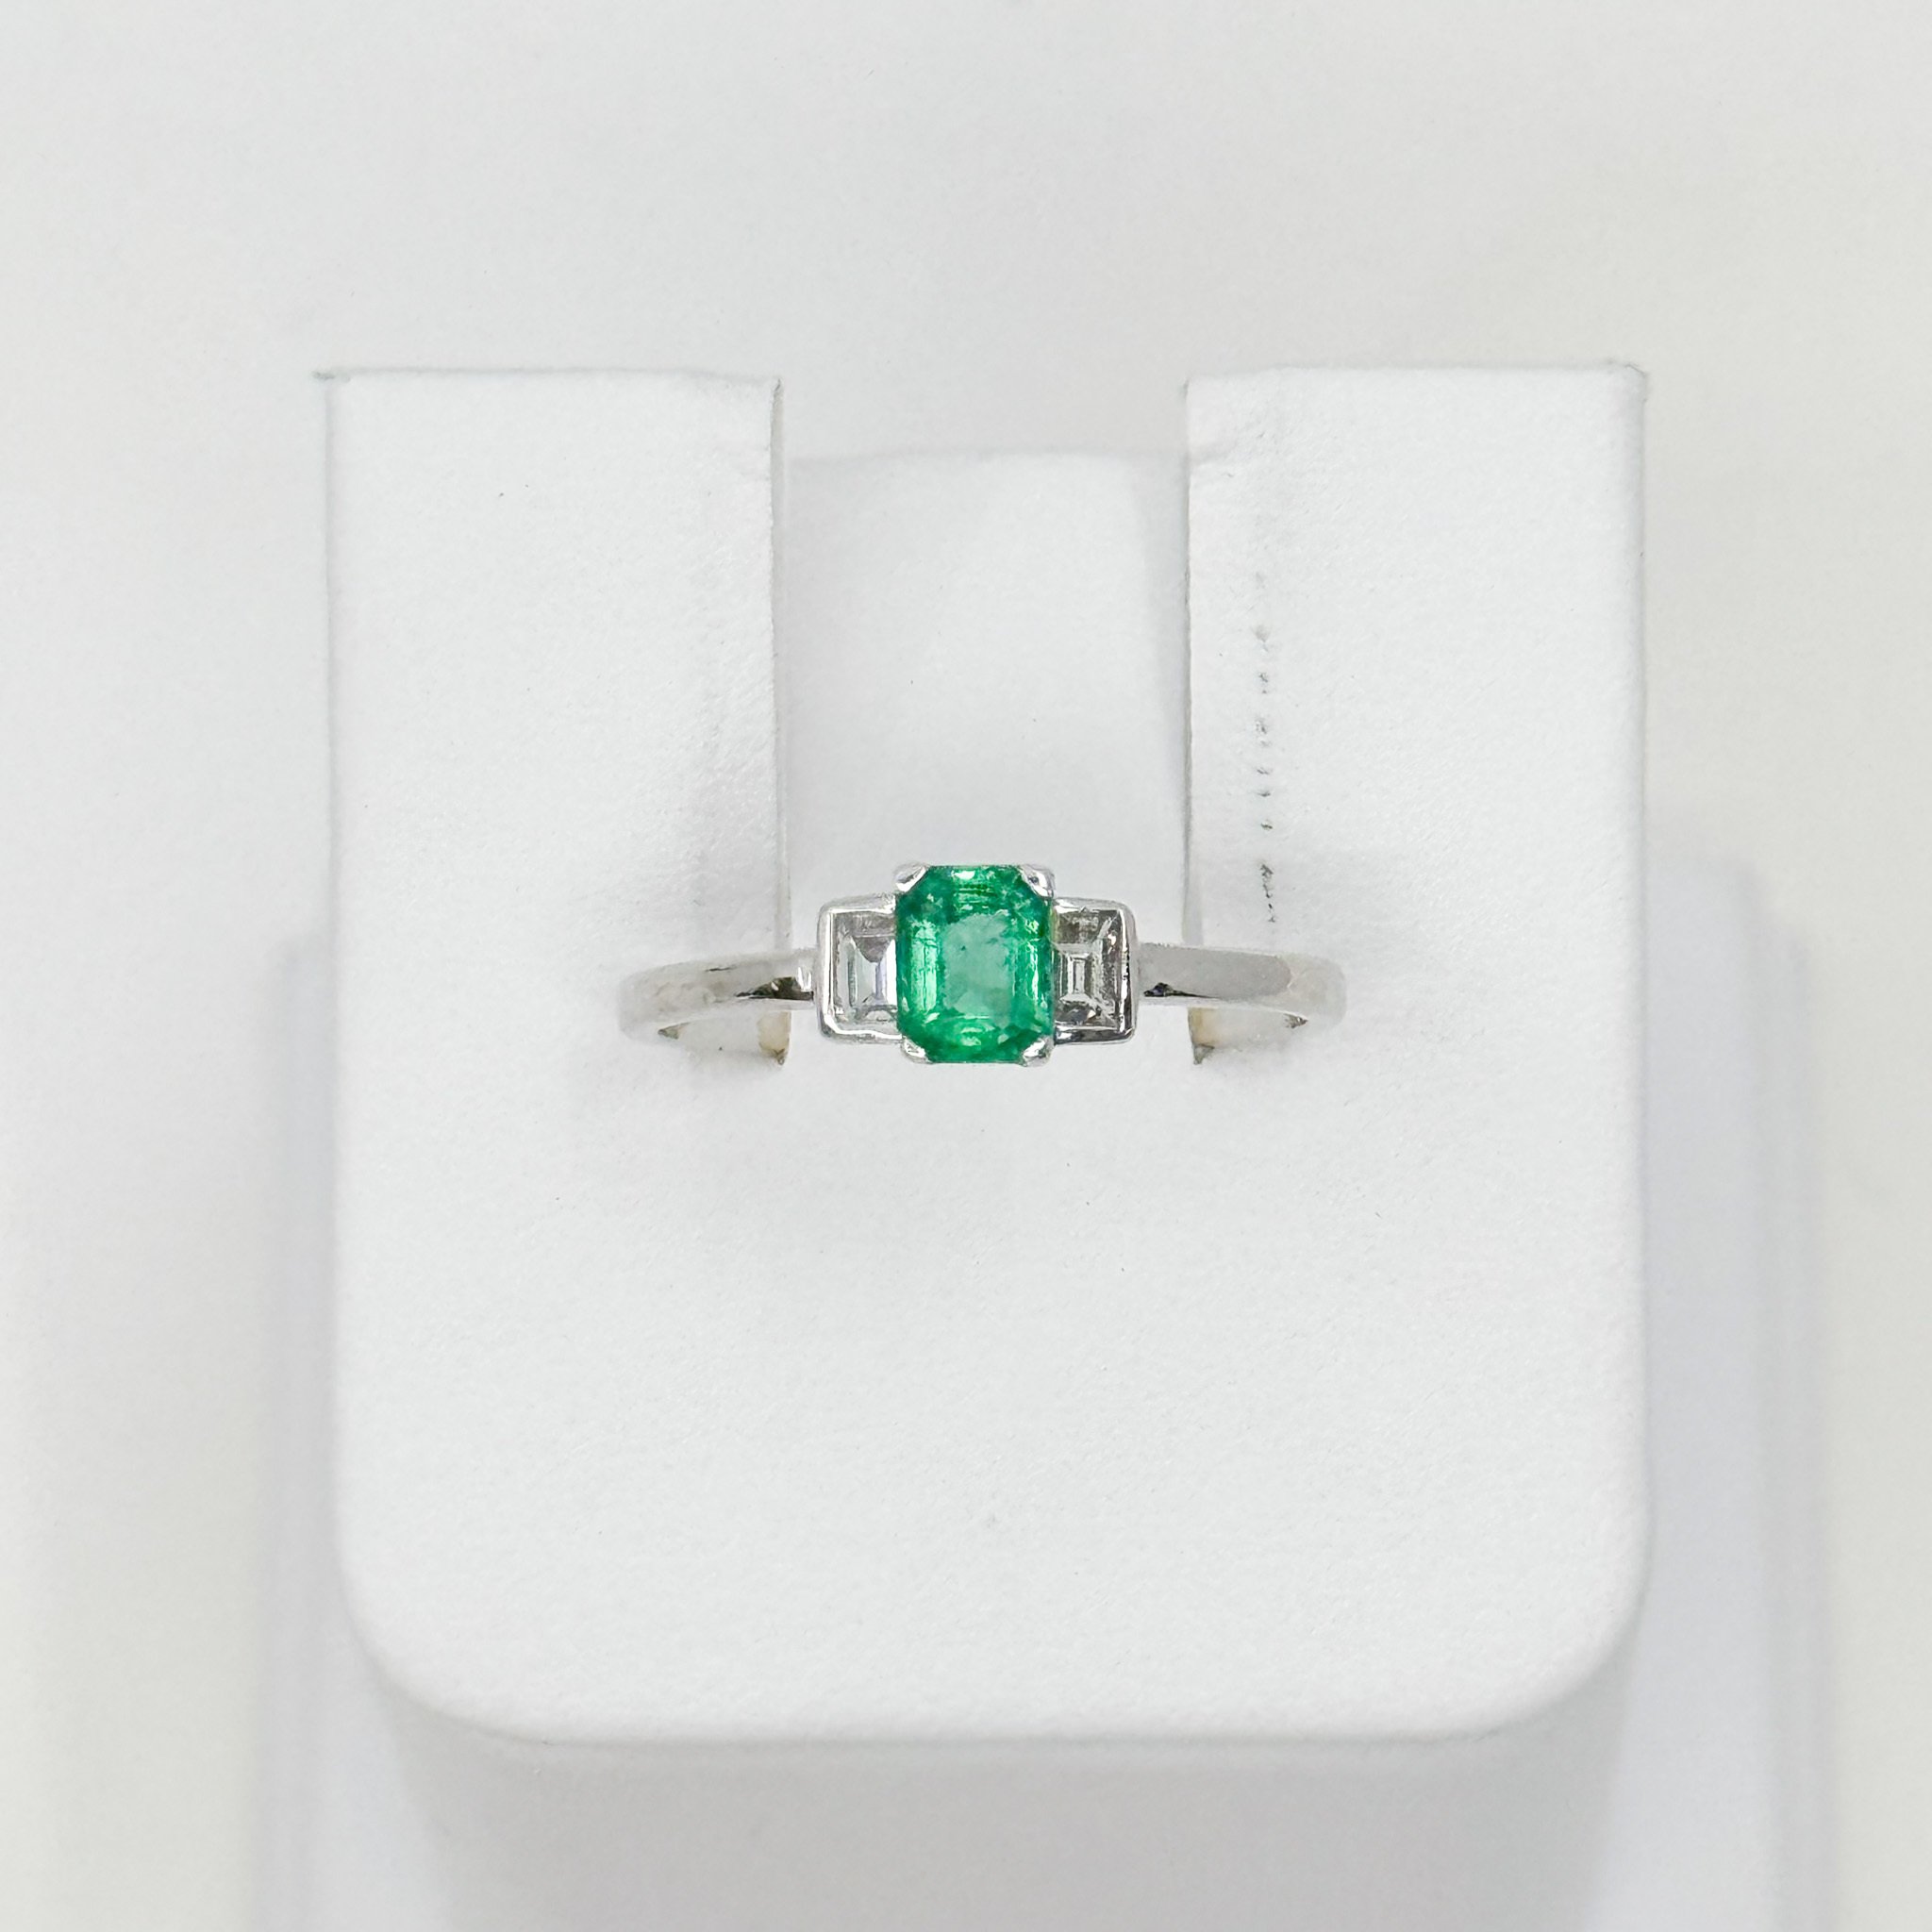 Emerald and diamond ring, 2 baguette 0.16ct, emerald 0.60ct, 14kw